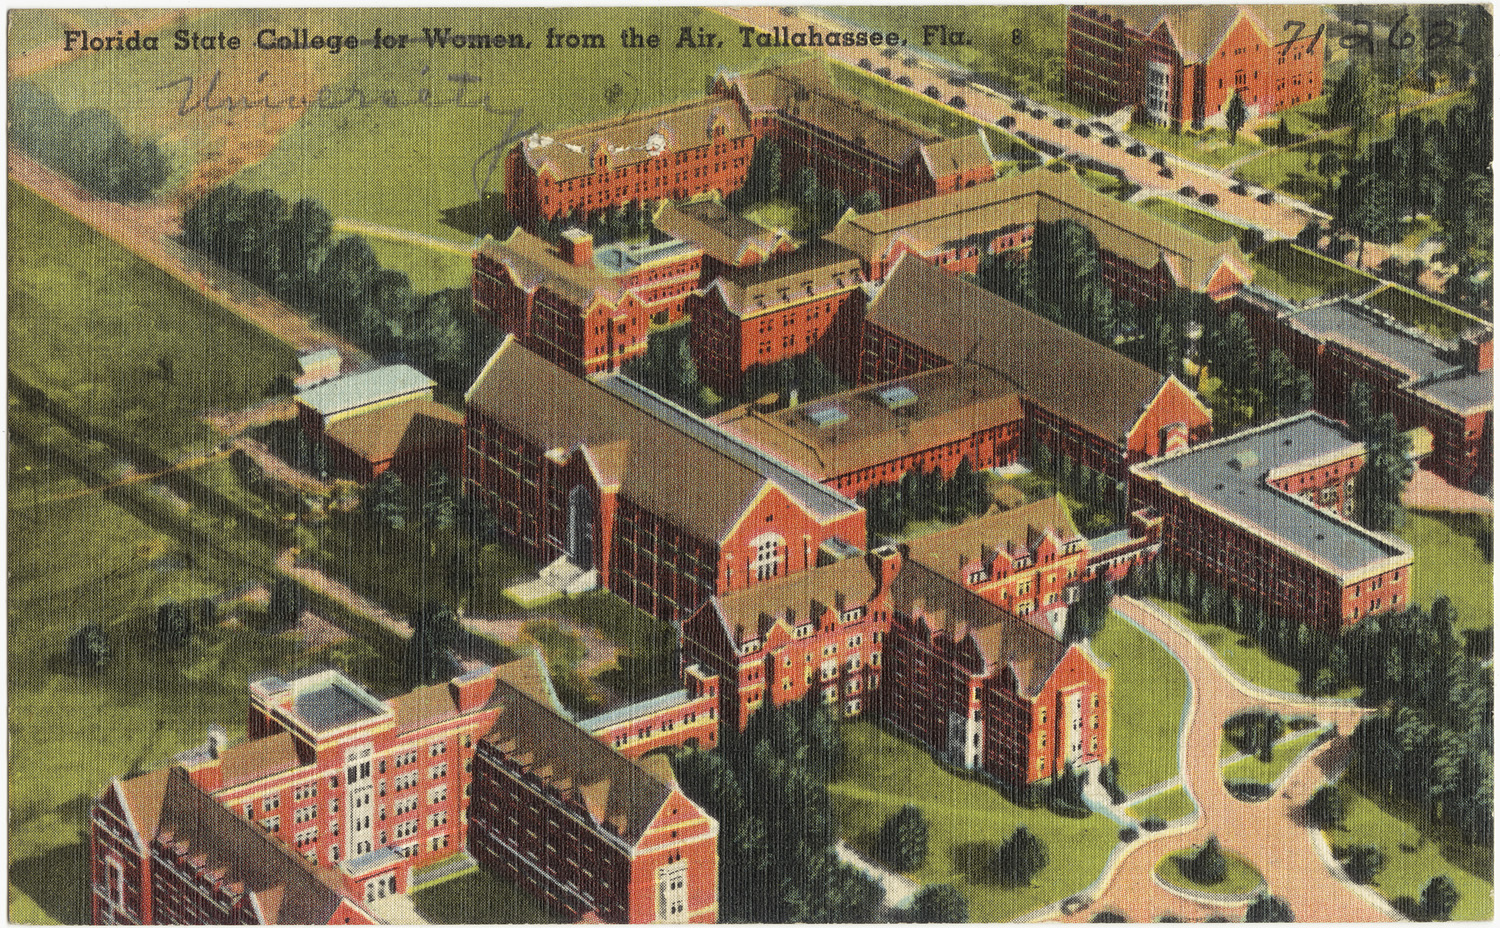 Arial view of Florida State College for Women--in a painting